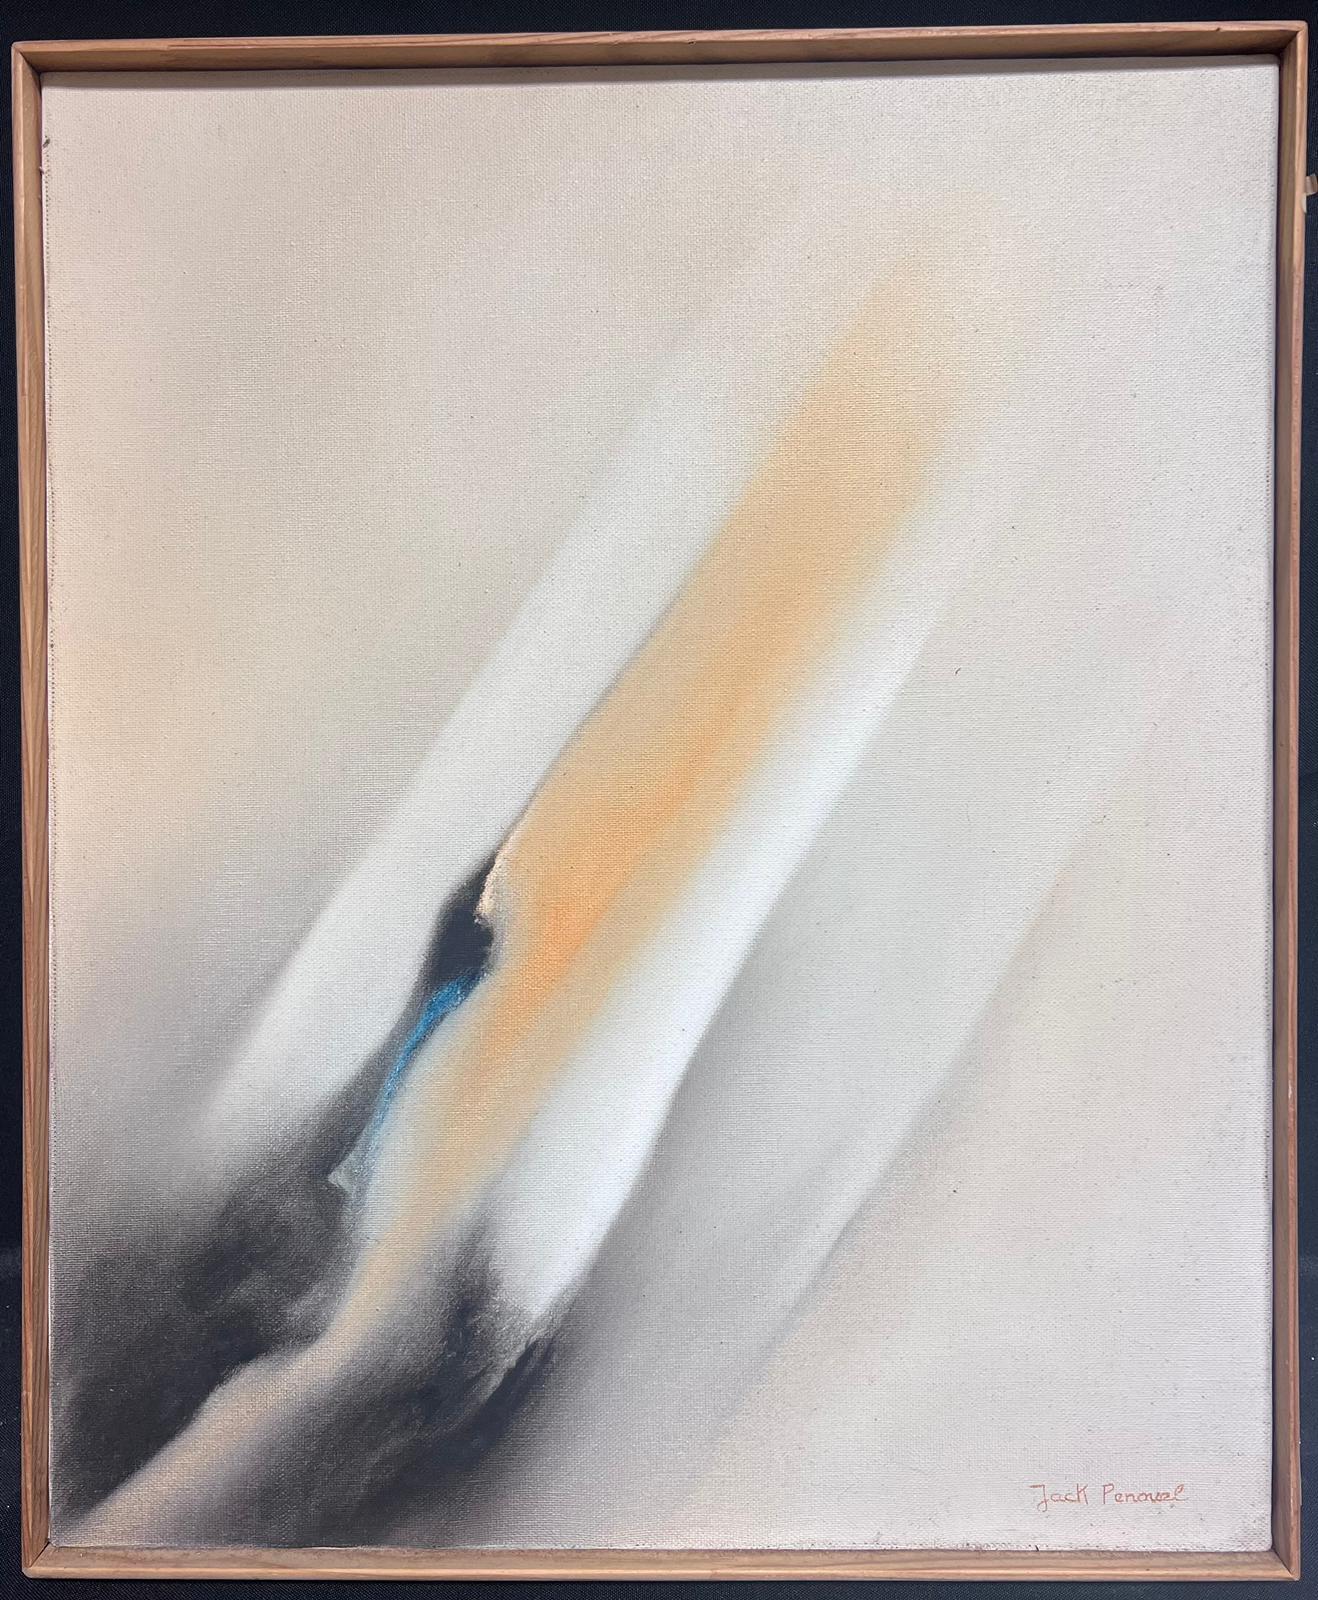 Abstract Composition
signed by Jack Penouel (French 1936-2018)
oil on canvas, framed
framed: 18.5 x 15.5 inches
canvas : 18 x 15 inches
provenance: the artists estate, France
condition: very good and sound condition